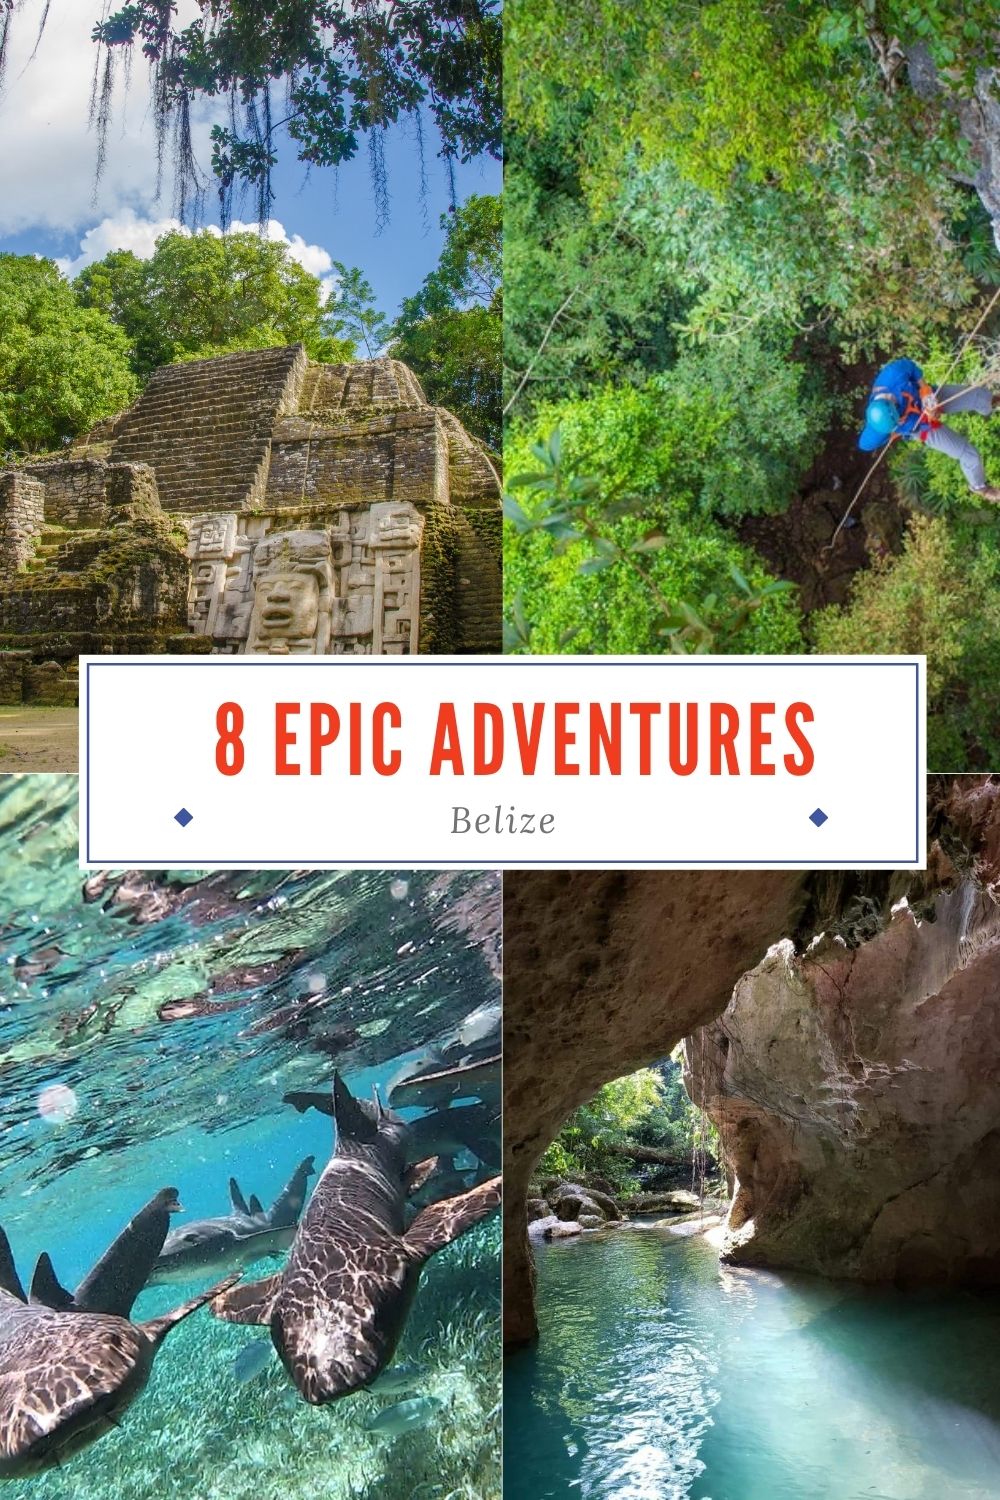 8 Adventurous Things To Do In Belize | If you’re a nature-loving, adventurous traveler, there is no shortage of things to entertain you in Belize! Here are 8 adventurous things to do in Belize! Get more travel inspiration, trip tips, and itineraries at www.youfoundsarah.com #centralamerica #belize #adventuretravel